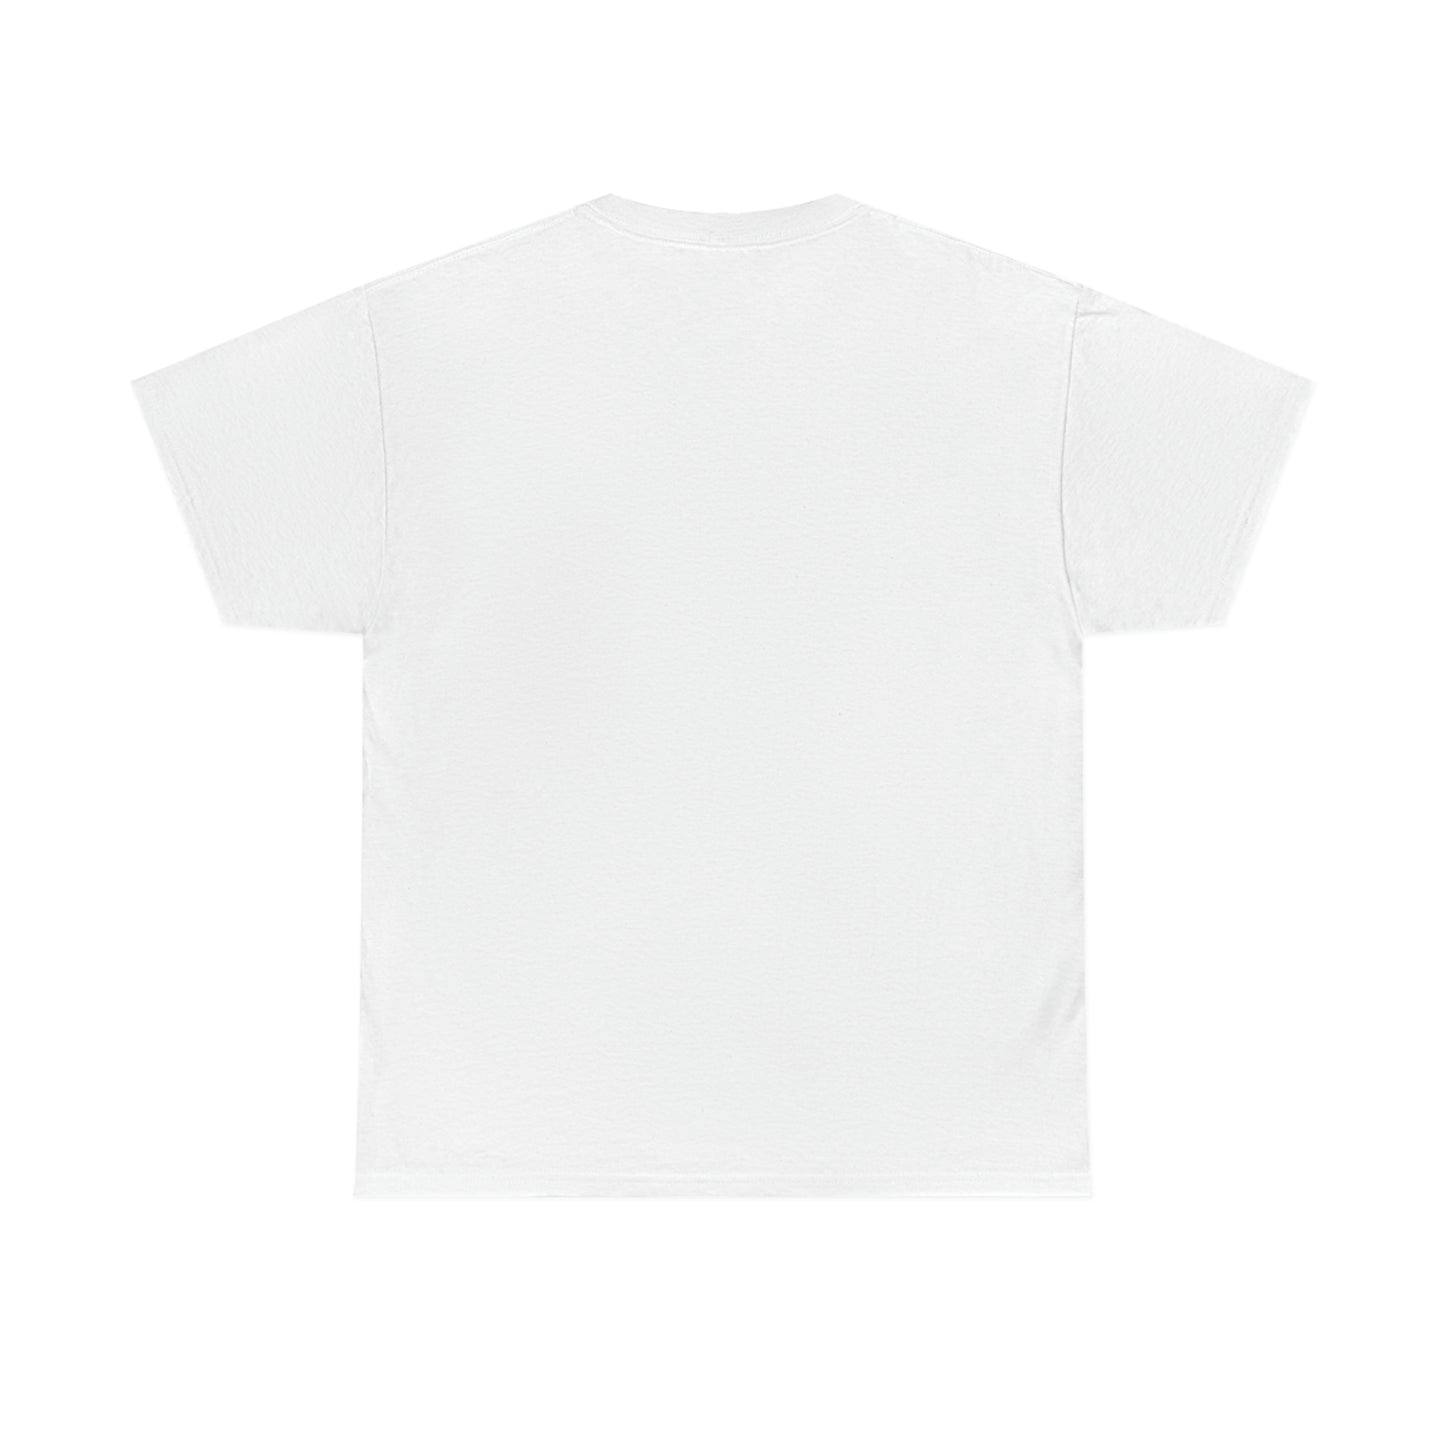 I've Been Dying for this Heavy Cotton Tee